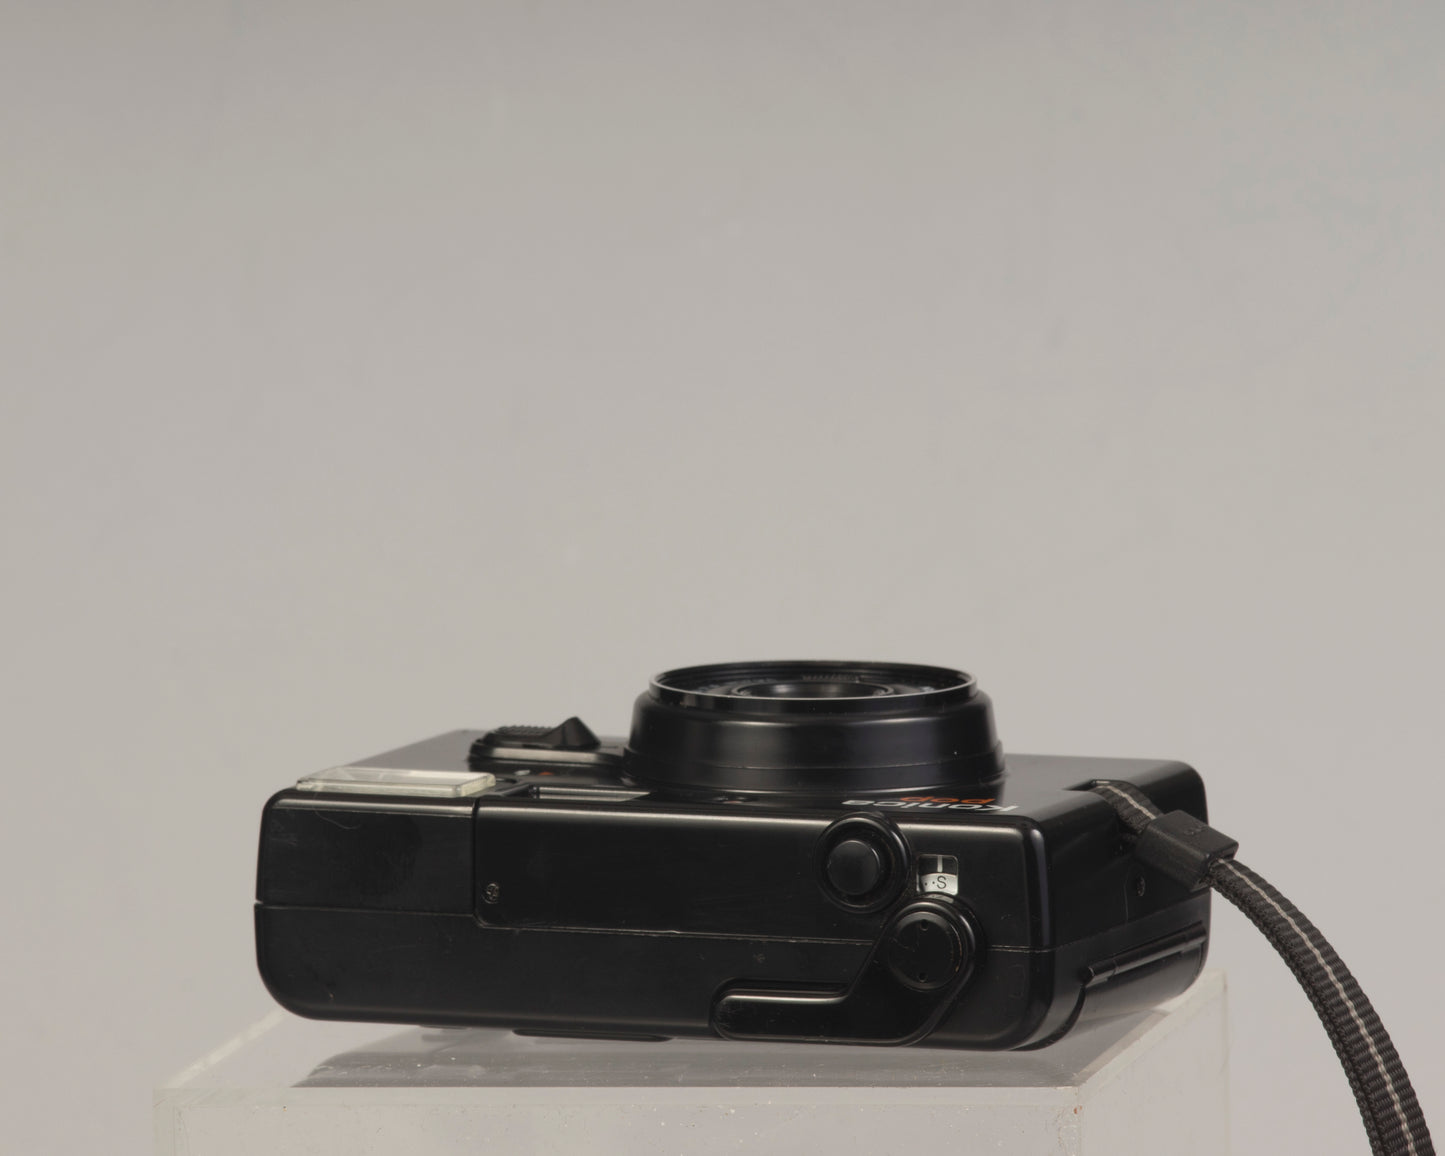 Konica Pop 35mm point-and-shoot camera